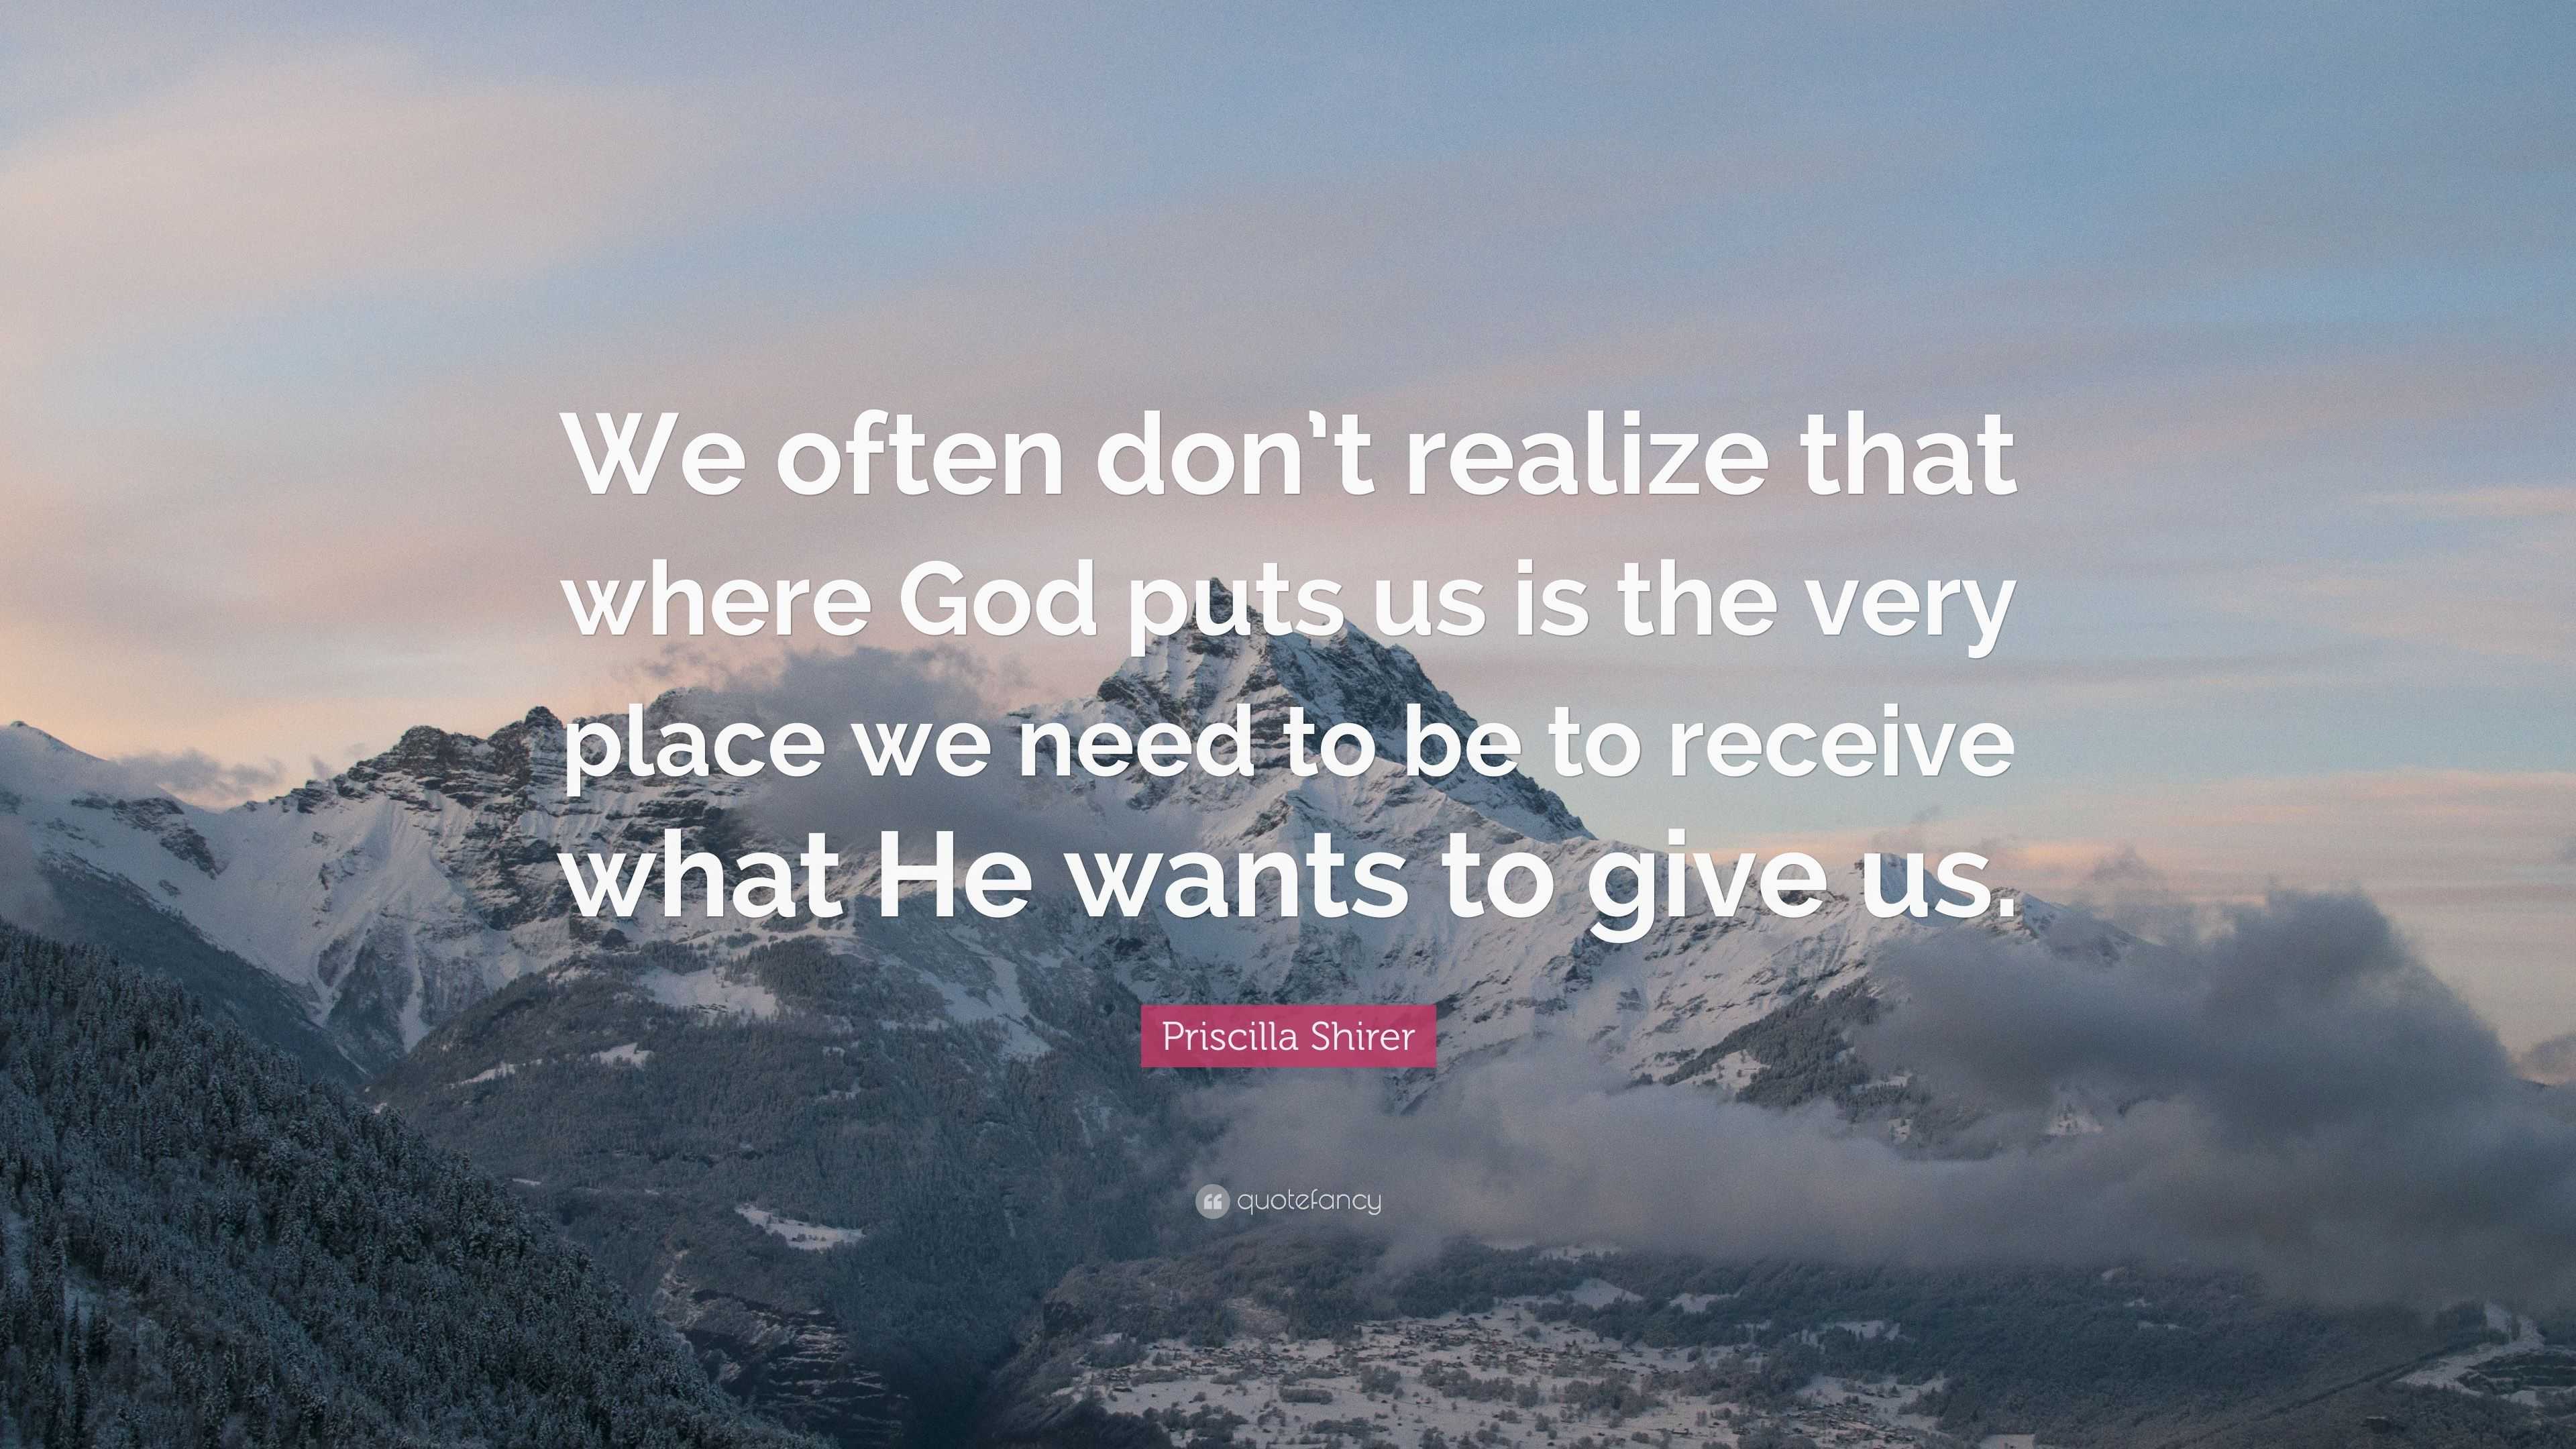 Priscilla Shirer Quote: “We often don’t realize that where God puts us ...